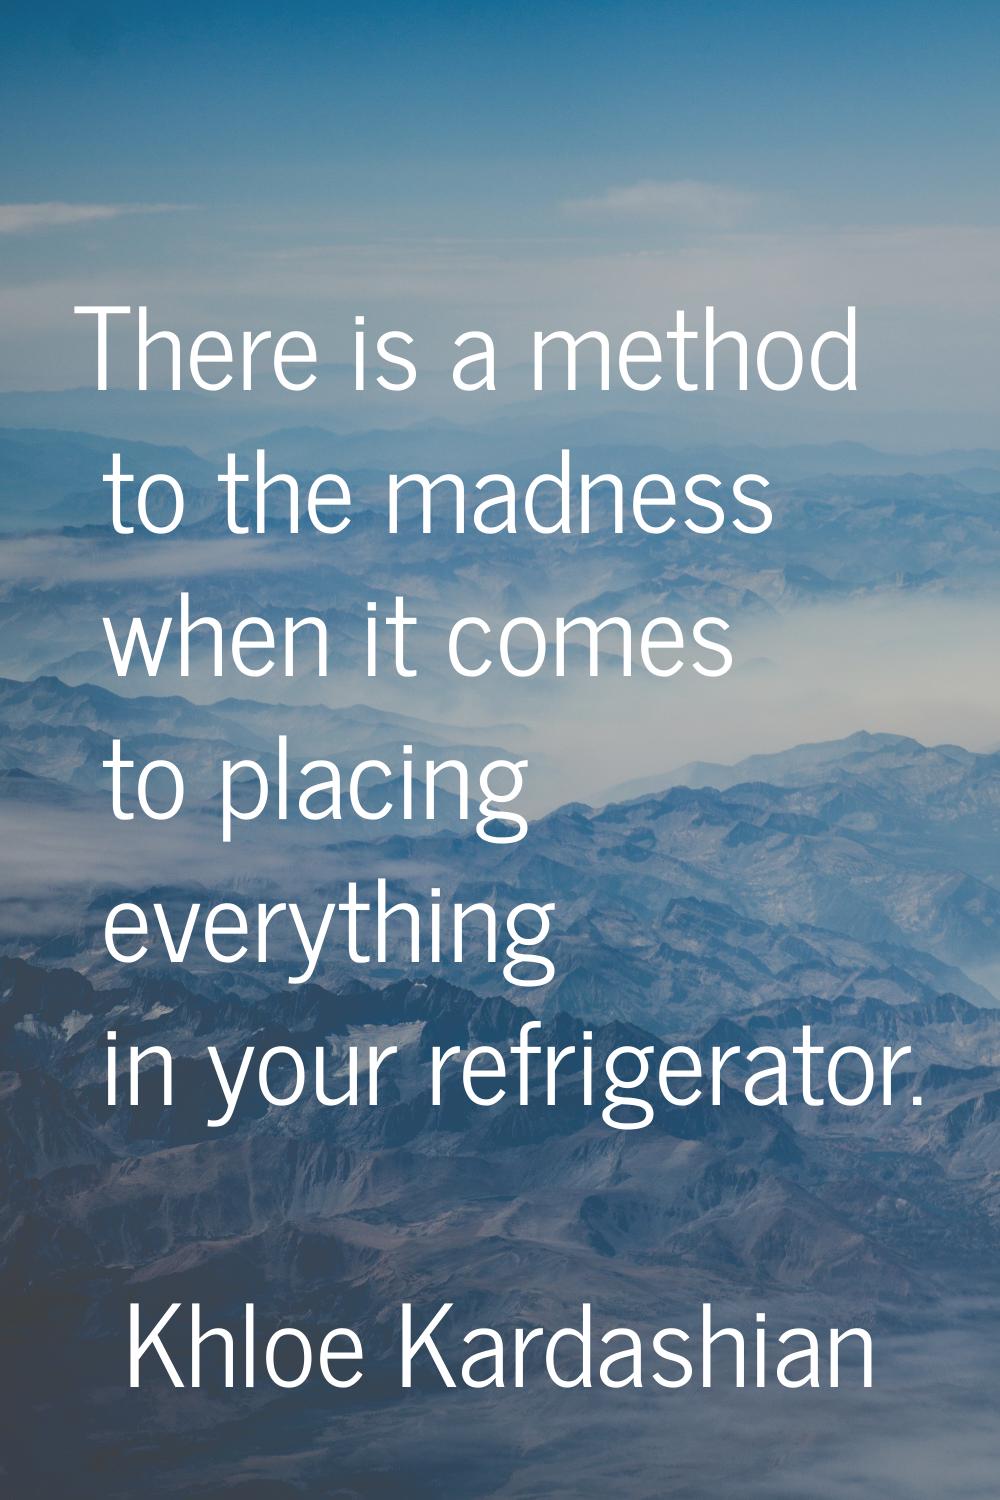 There is a method to the madness when it comes to placing everything in your refrigerator.